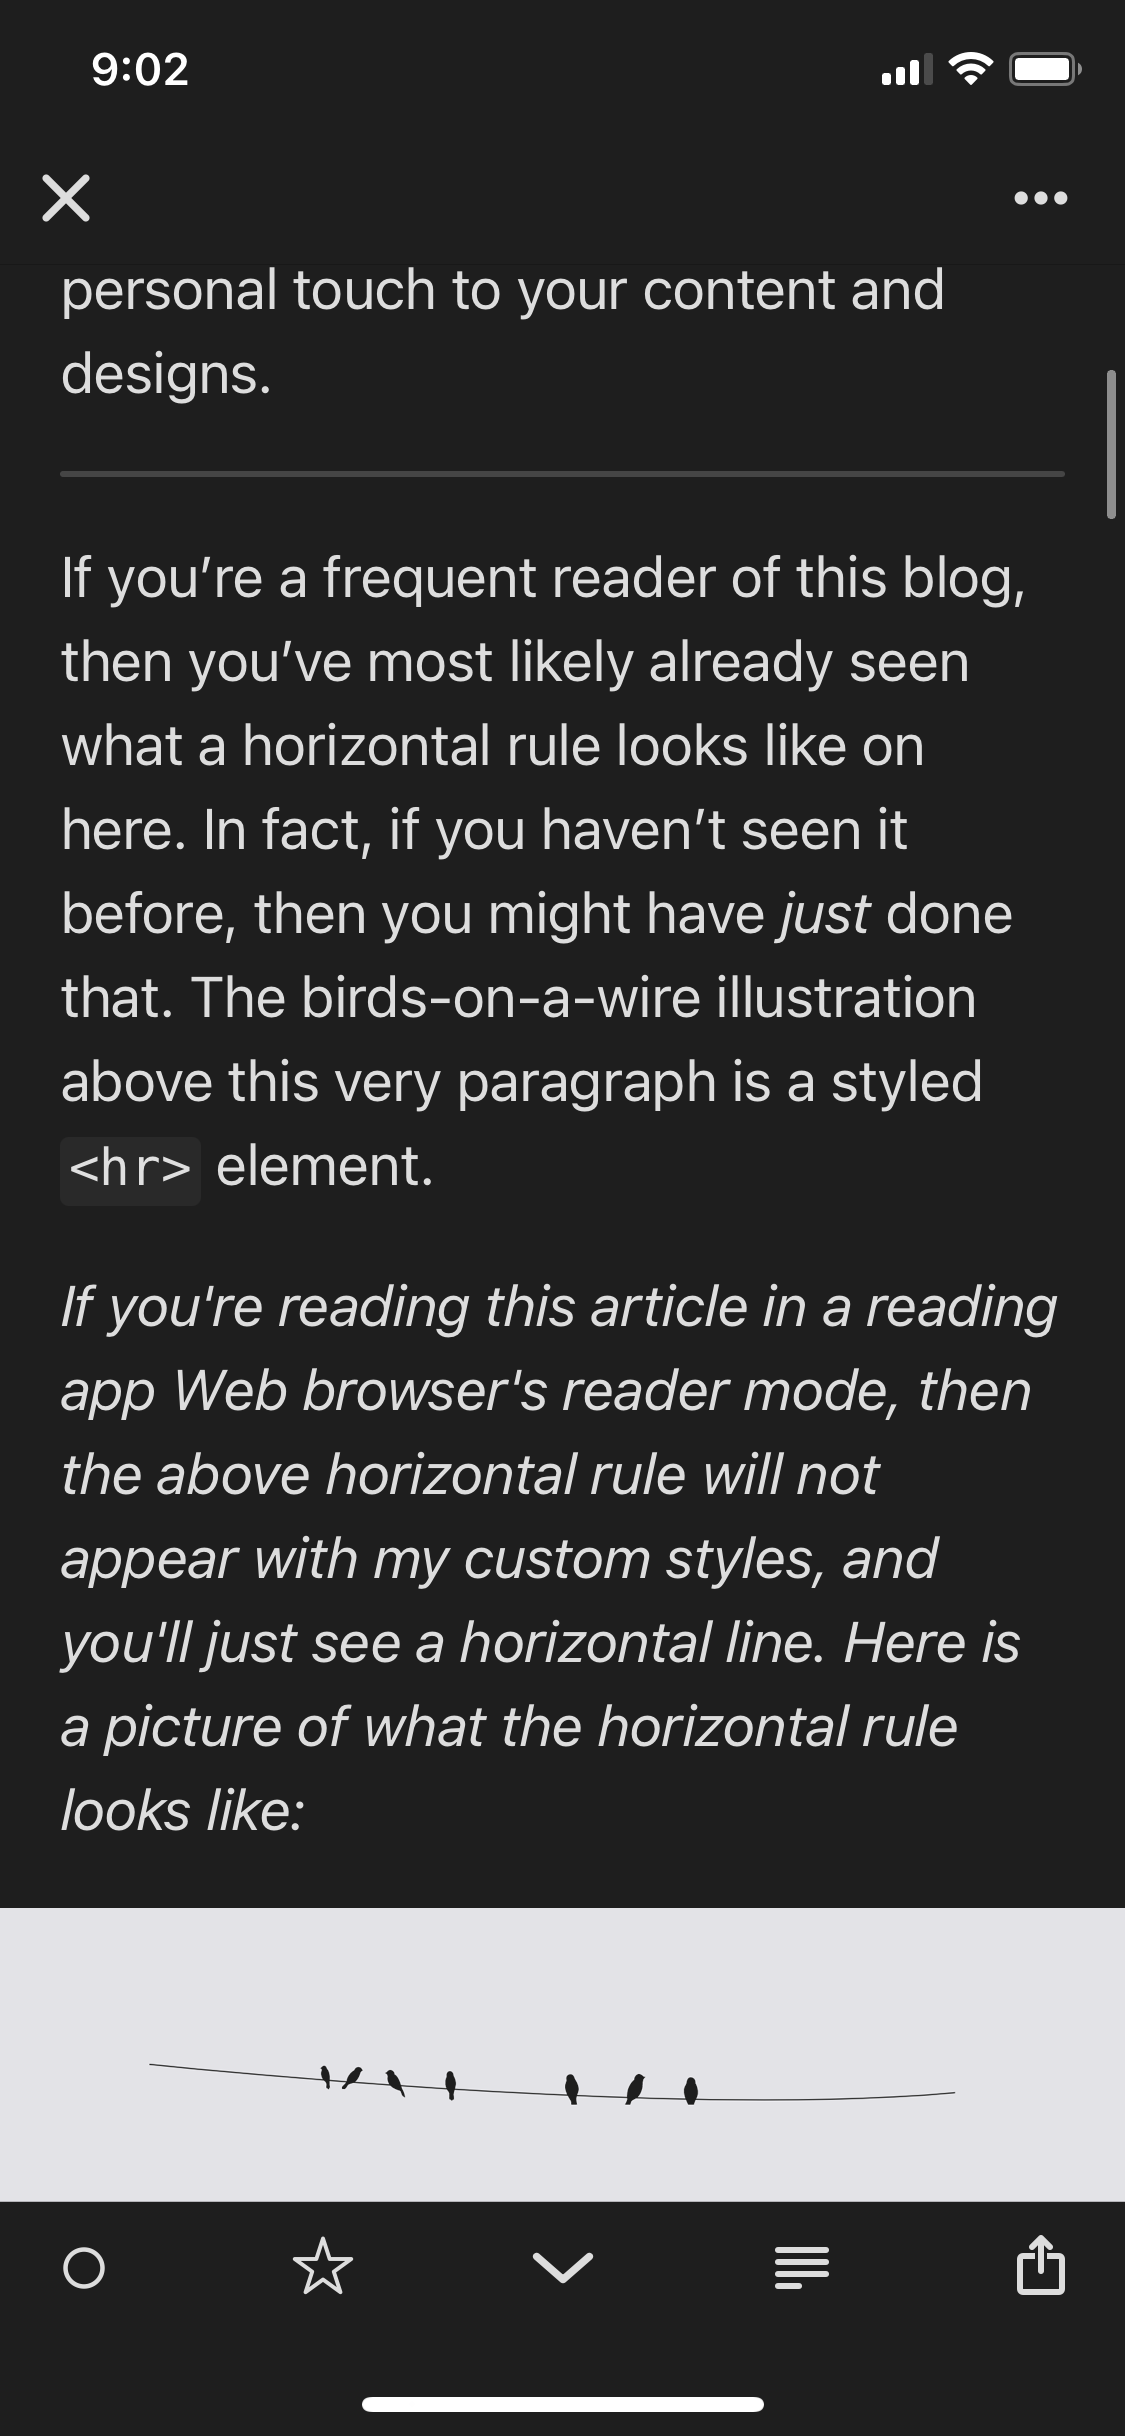 Screenshot of what the article reads like in Reeder app with the fallback reader-only text. Above the fallback text is a horizontal line, which is the horizontal rule the text is referring to, and it is rendered as a simple line by Reeder app.